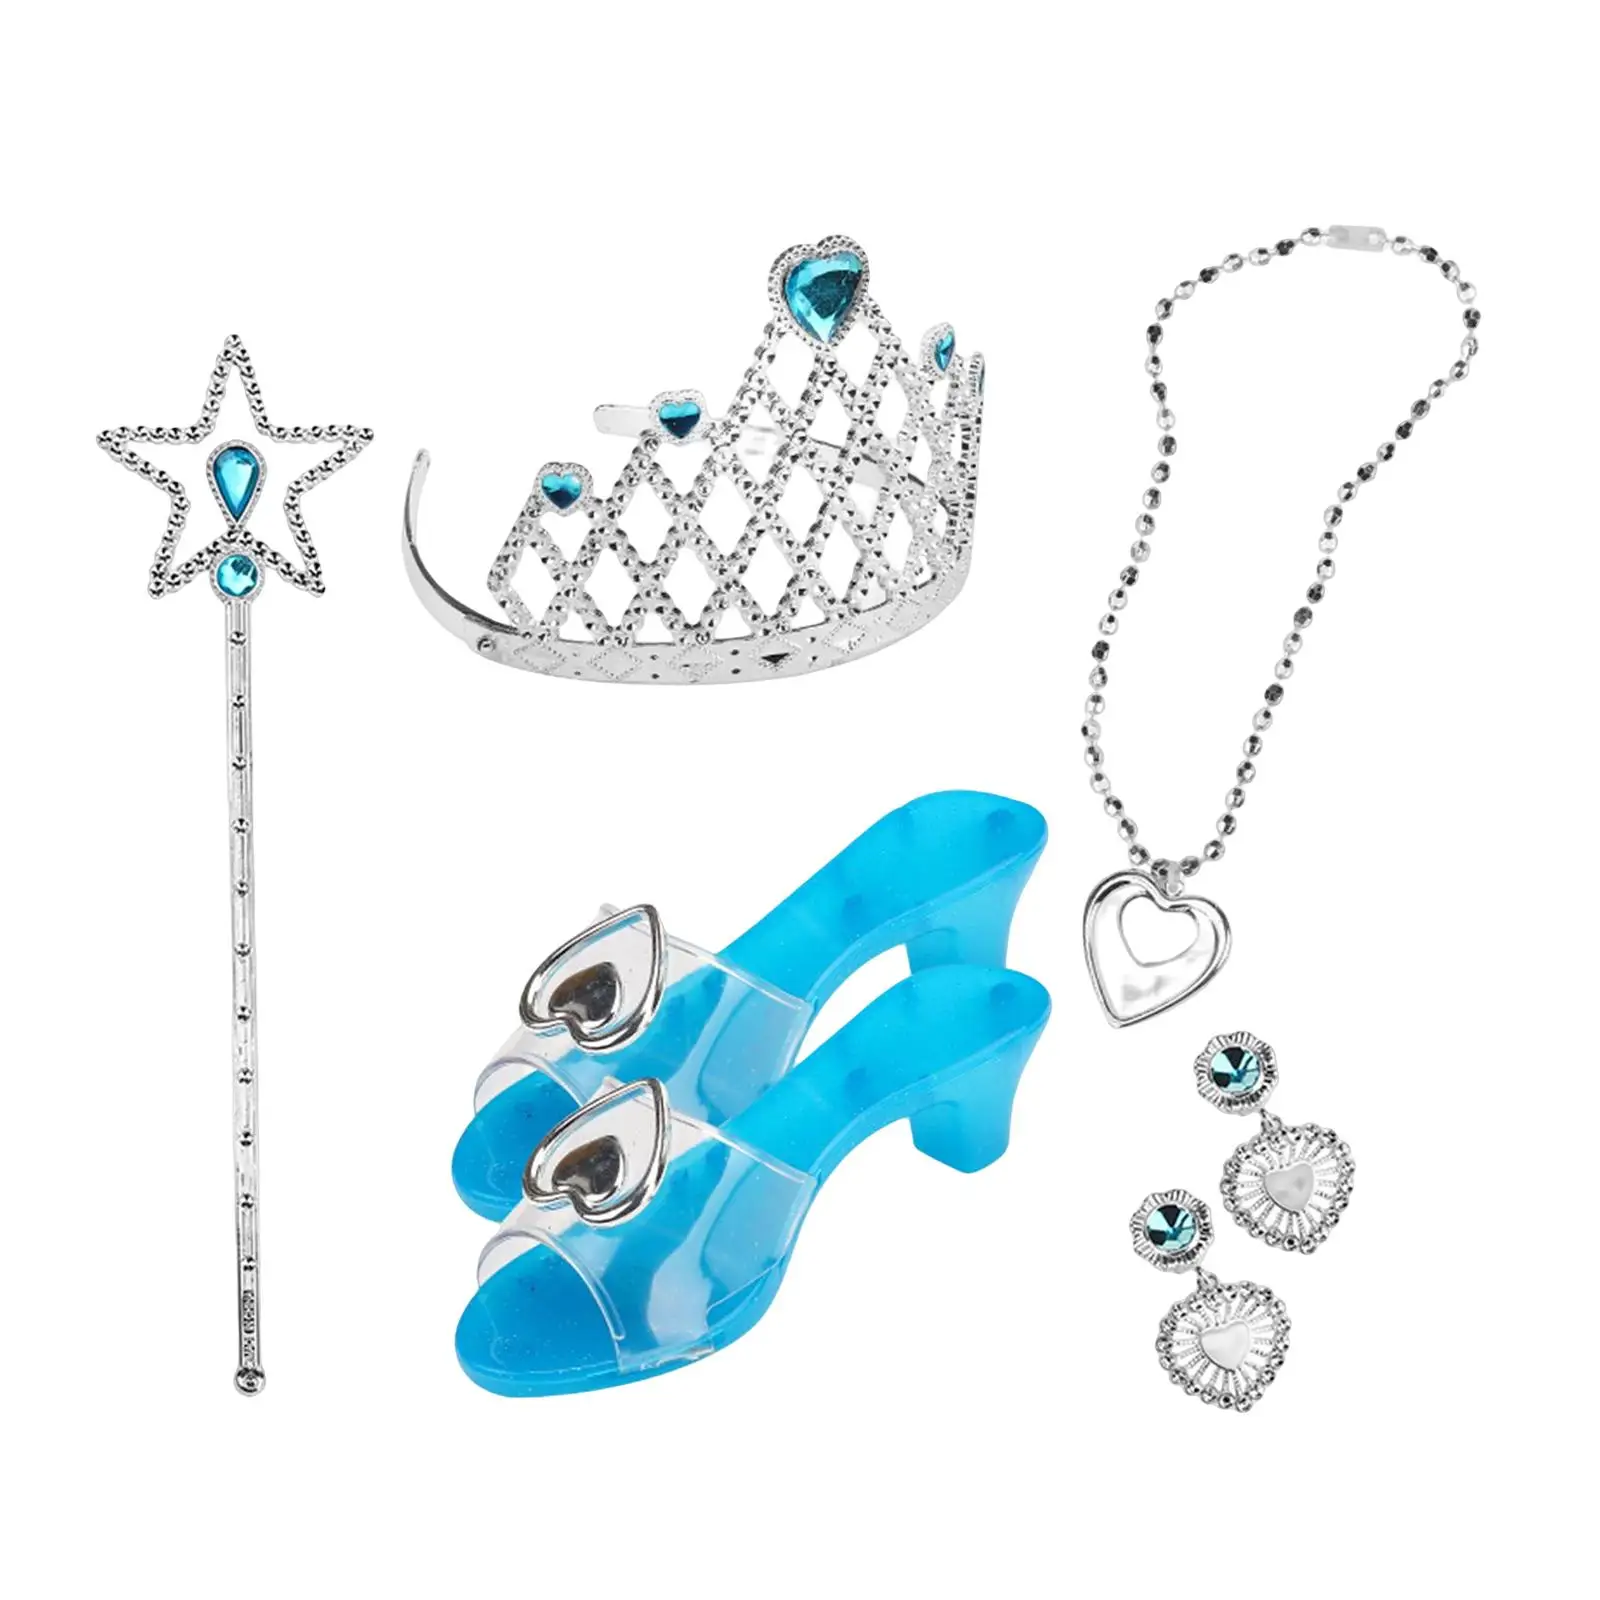 7x Little Girls Jewelry necklace crowns Shoes Girls Role Play Set pole